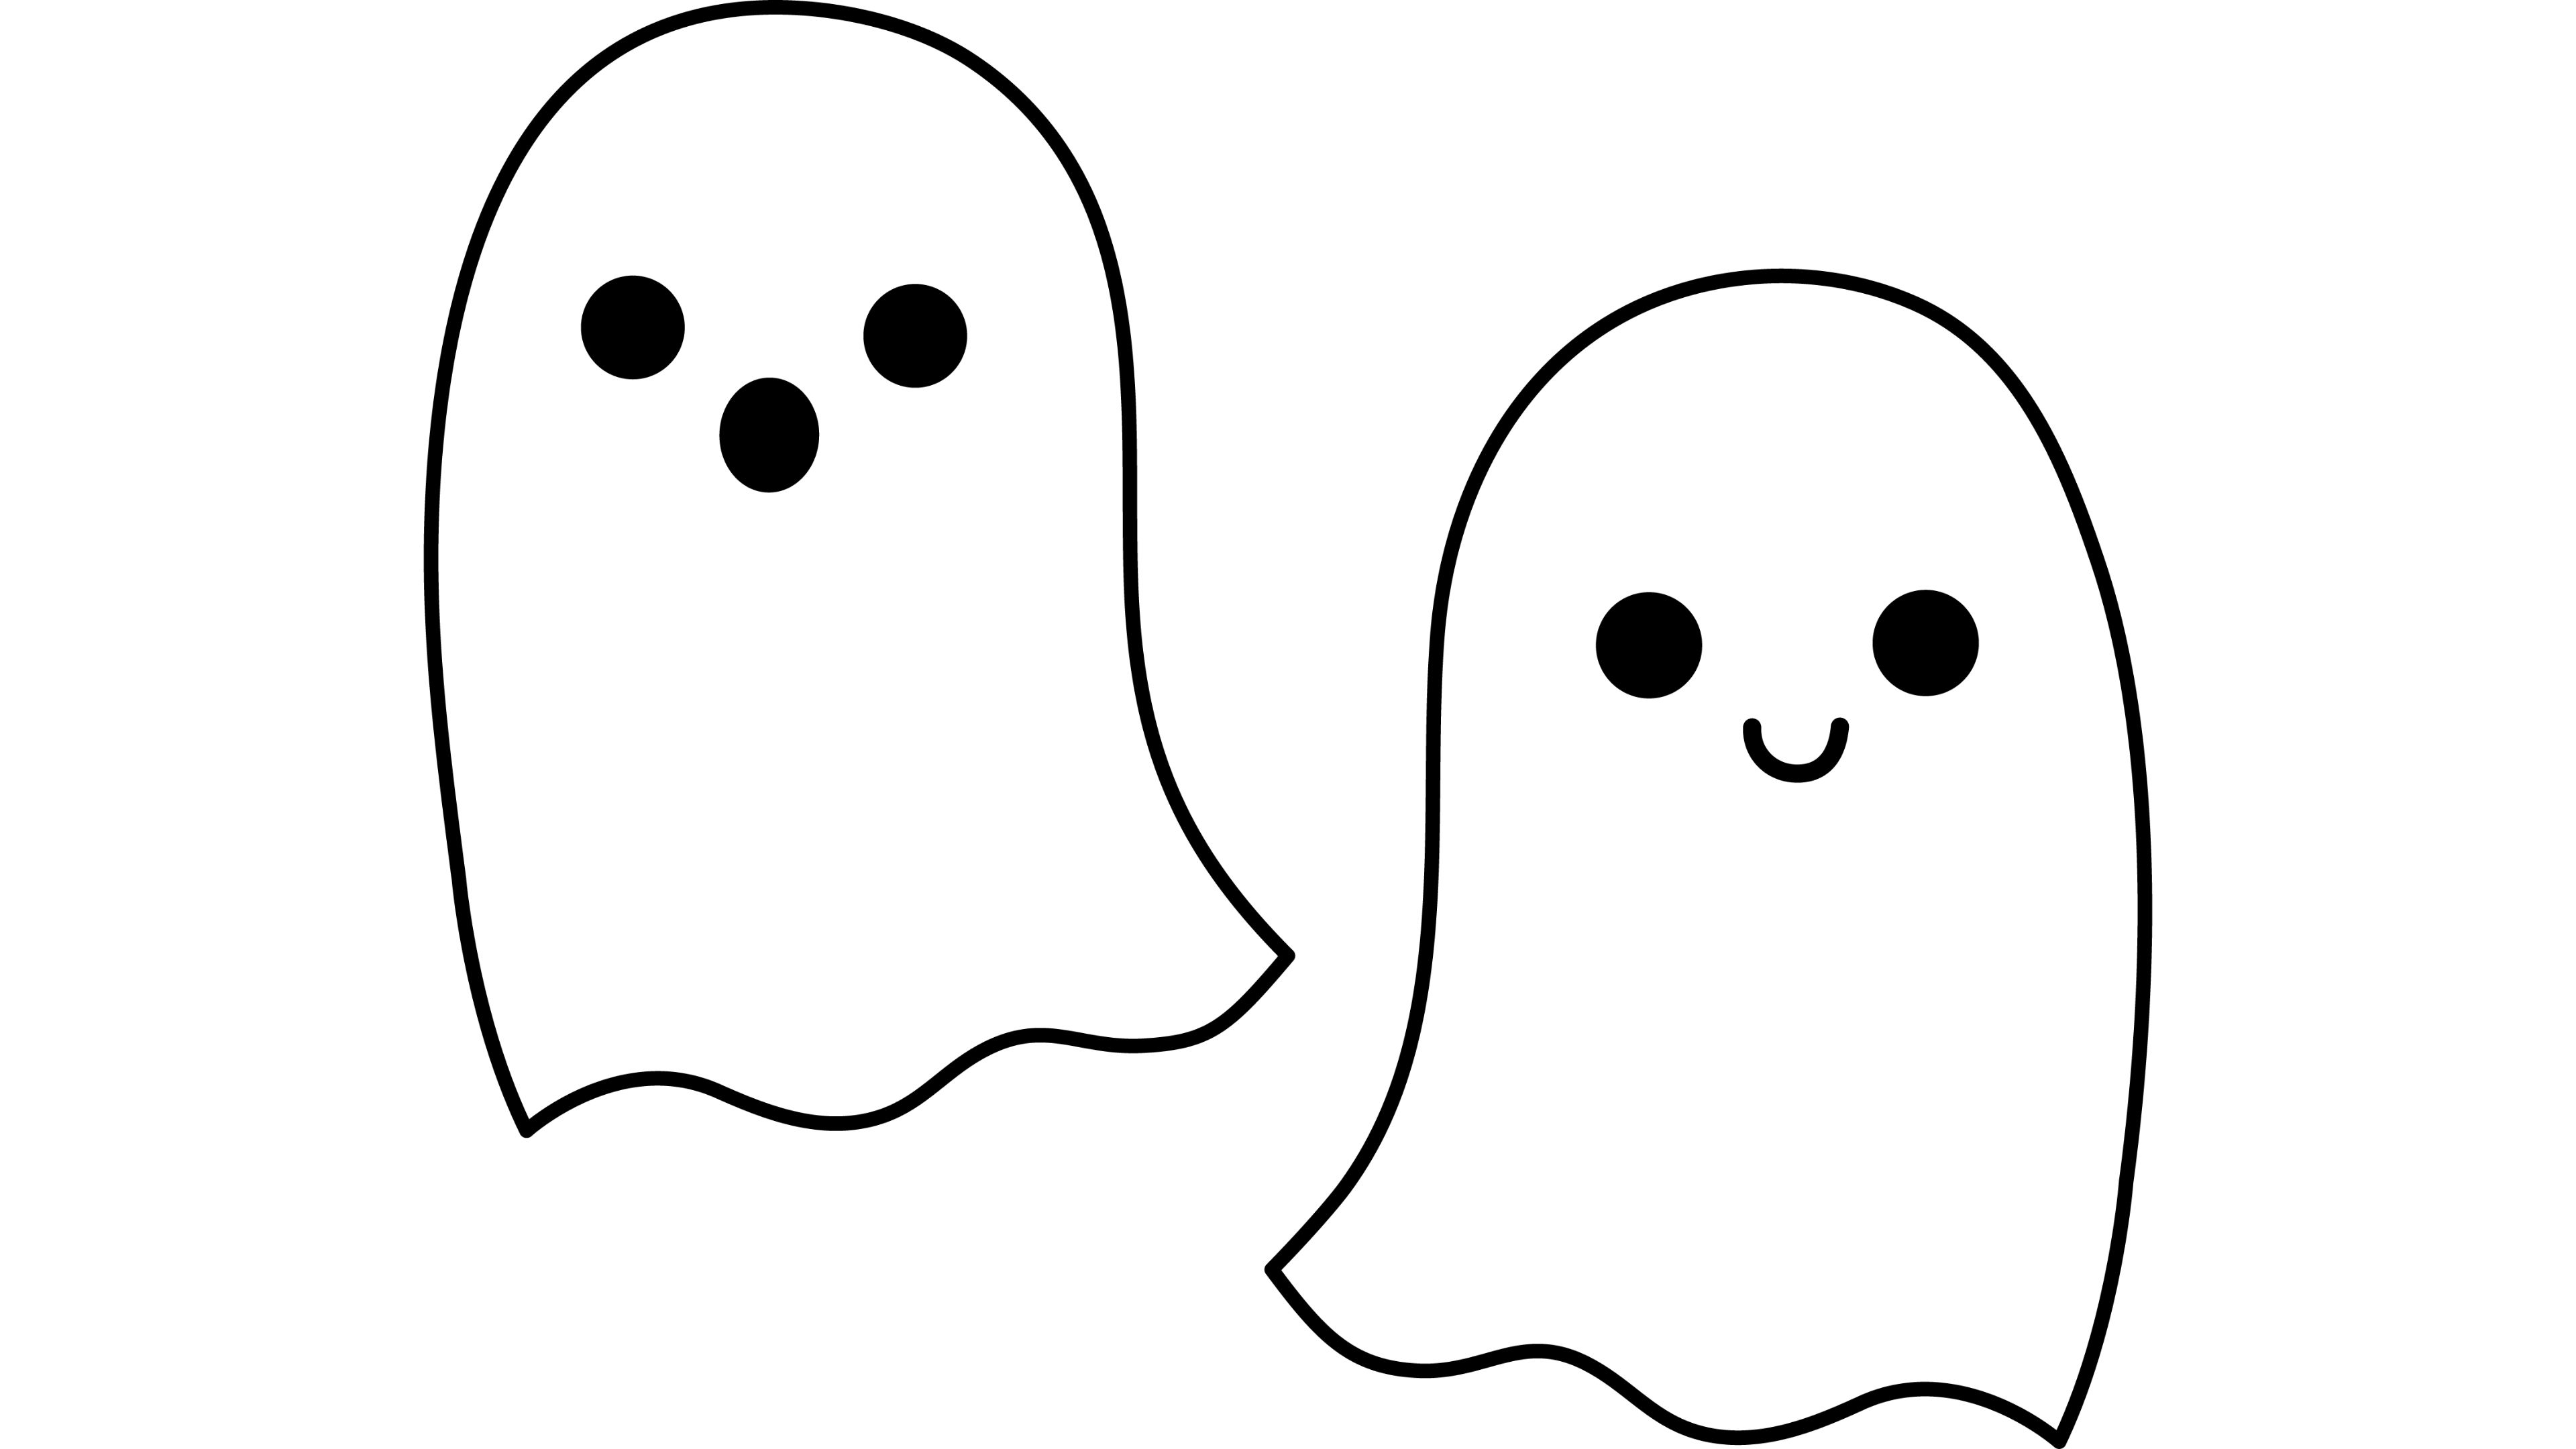 Halloween Ghost Wallpaper and Background in 2022  Halloween desktop  wallpaper Ha  Halloween desktop wallpaper Cute laptop wallpaper Halloween  wallpaper iphone